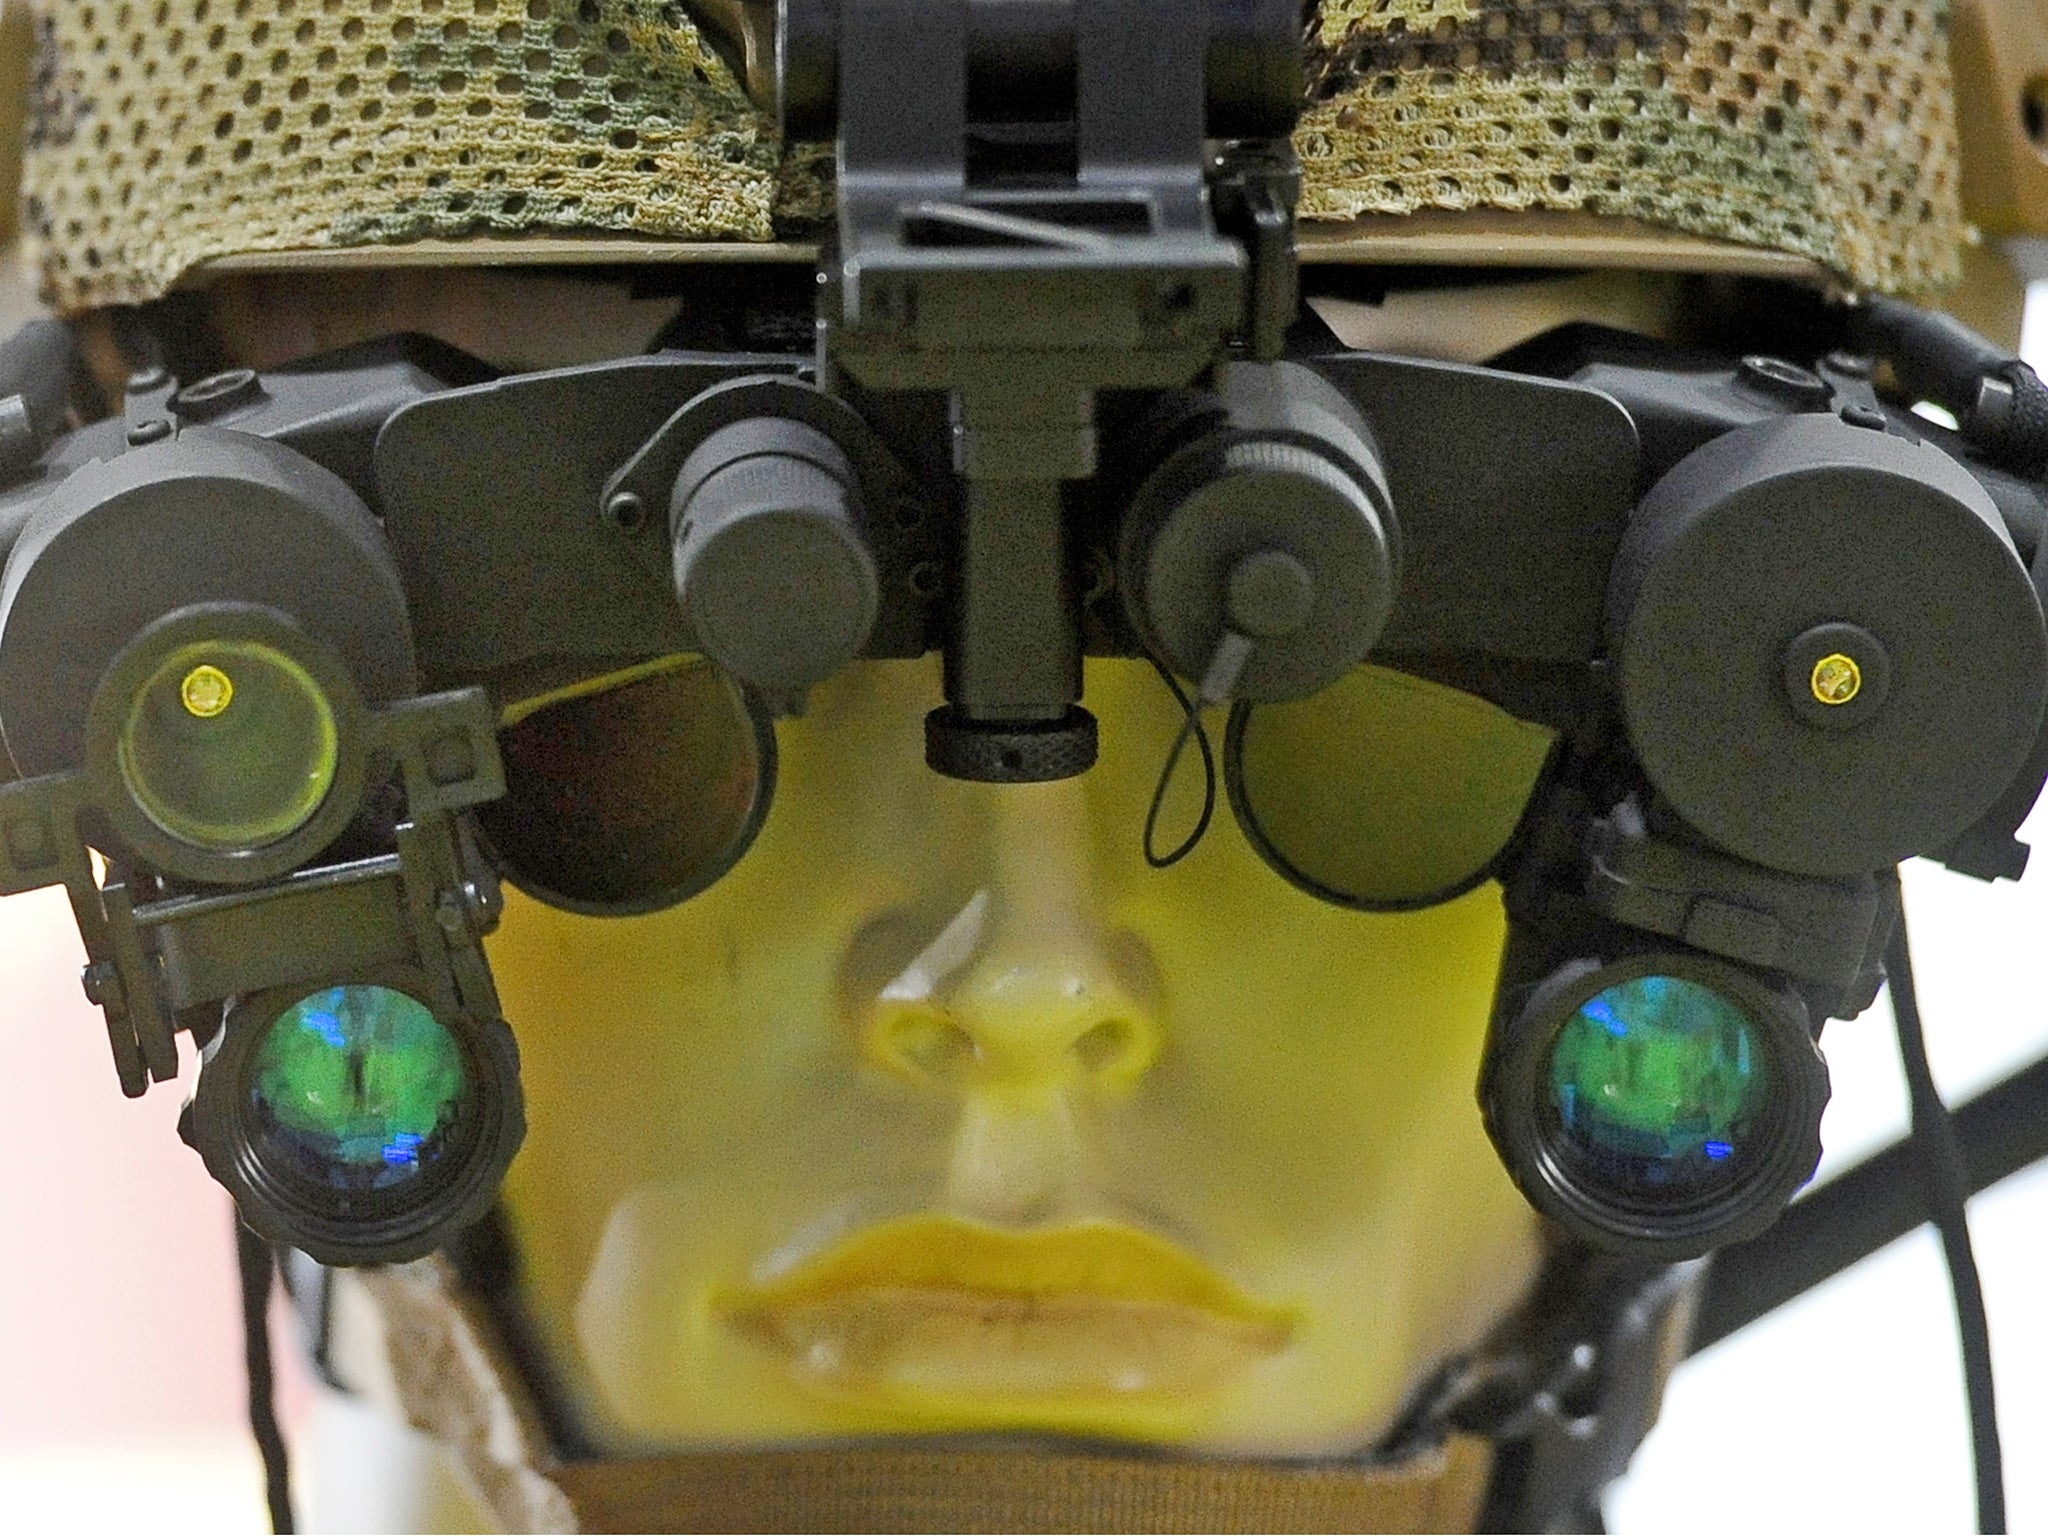 Nightvision goggles on display at the DSEI arms fair in London last year